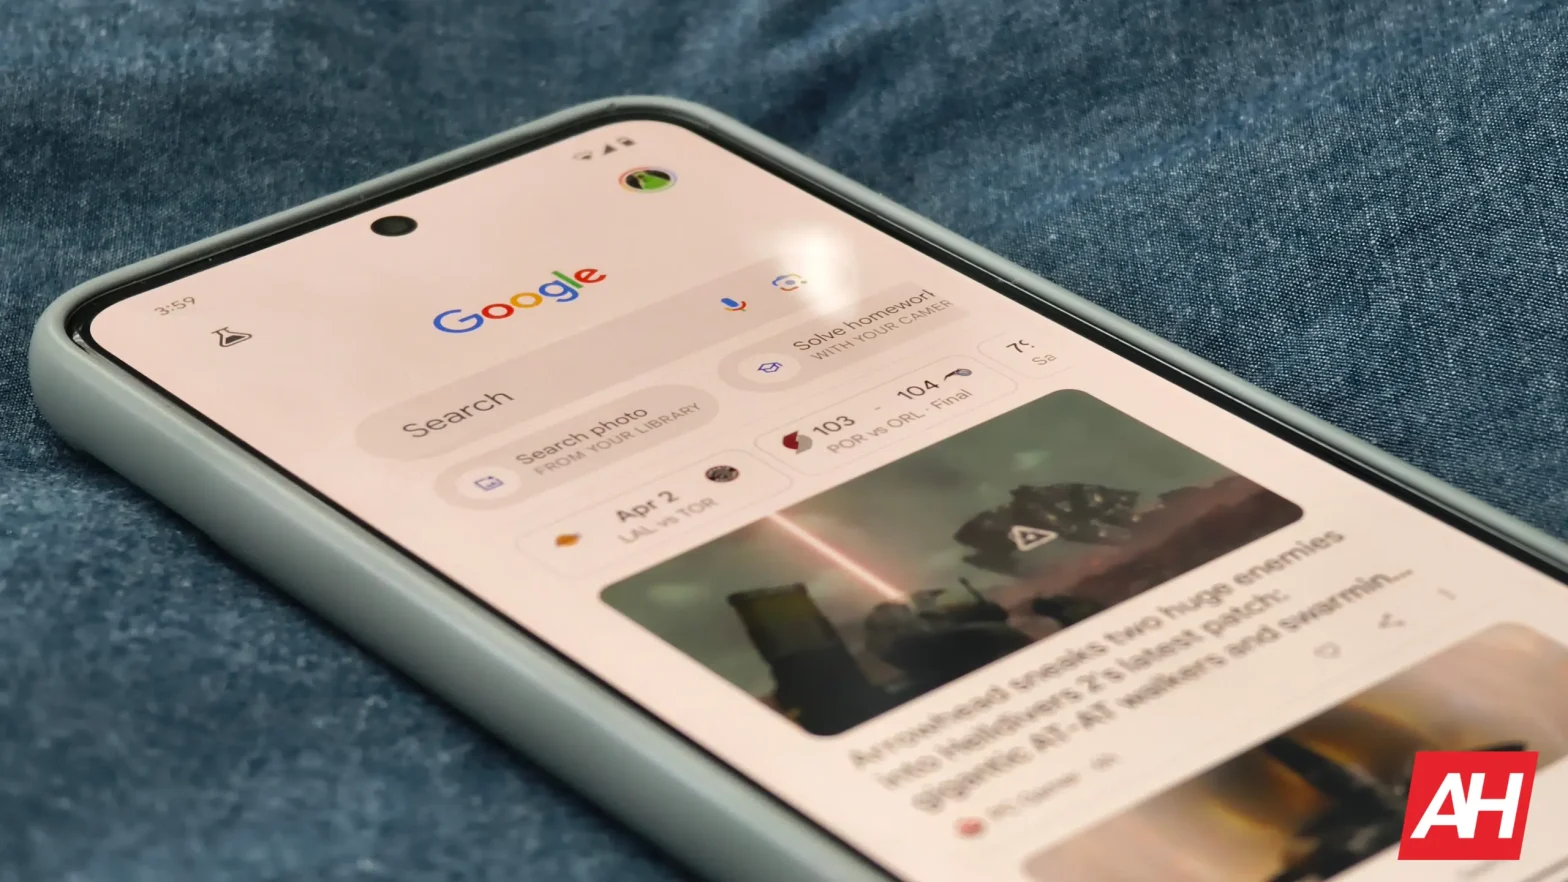 Google is testing a bottom bar in the Google app